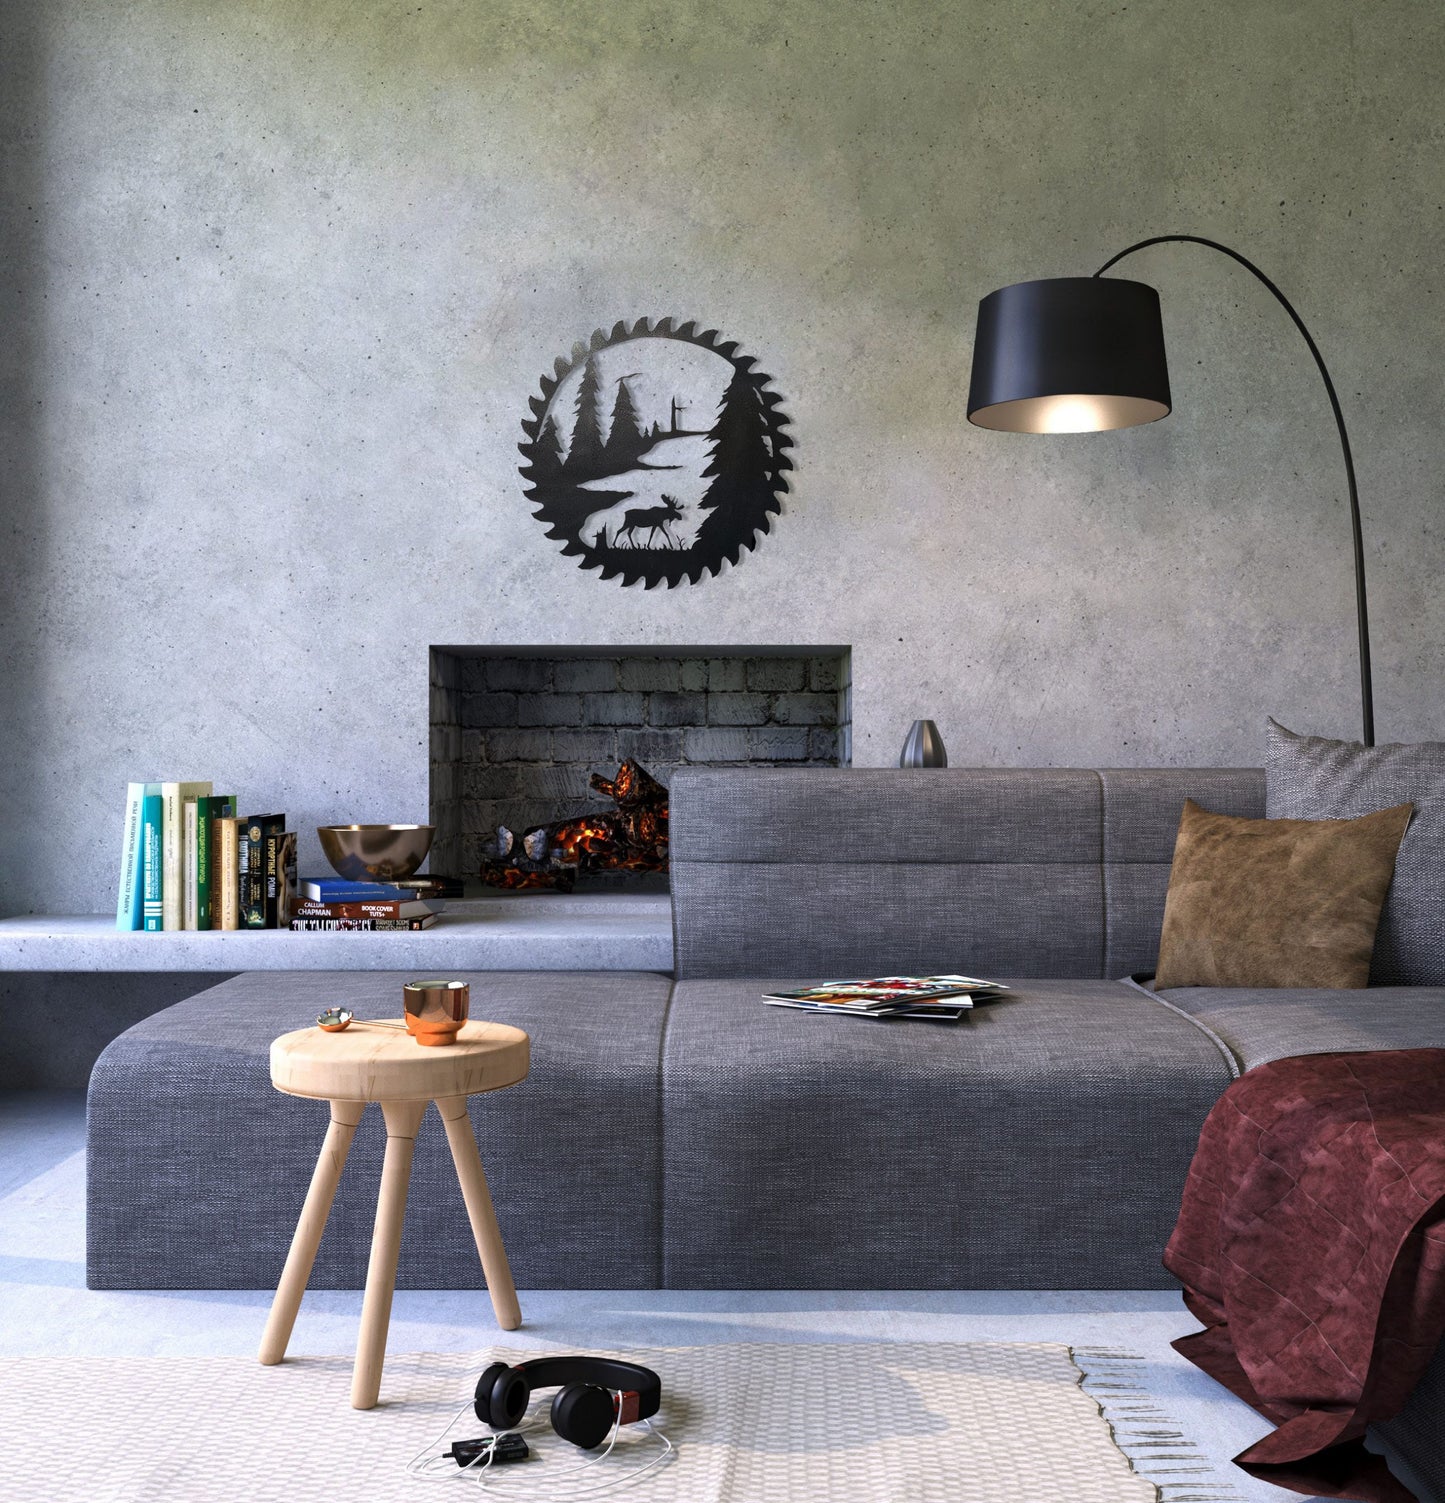 buzz-blade-in-living-room-moose-black-scaled-1